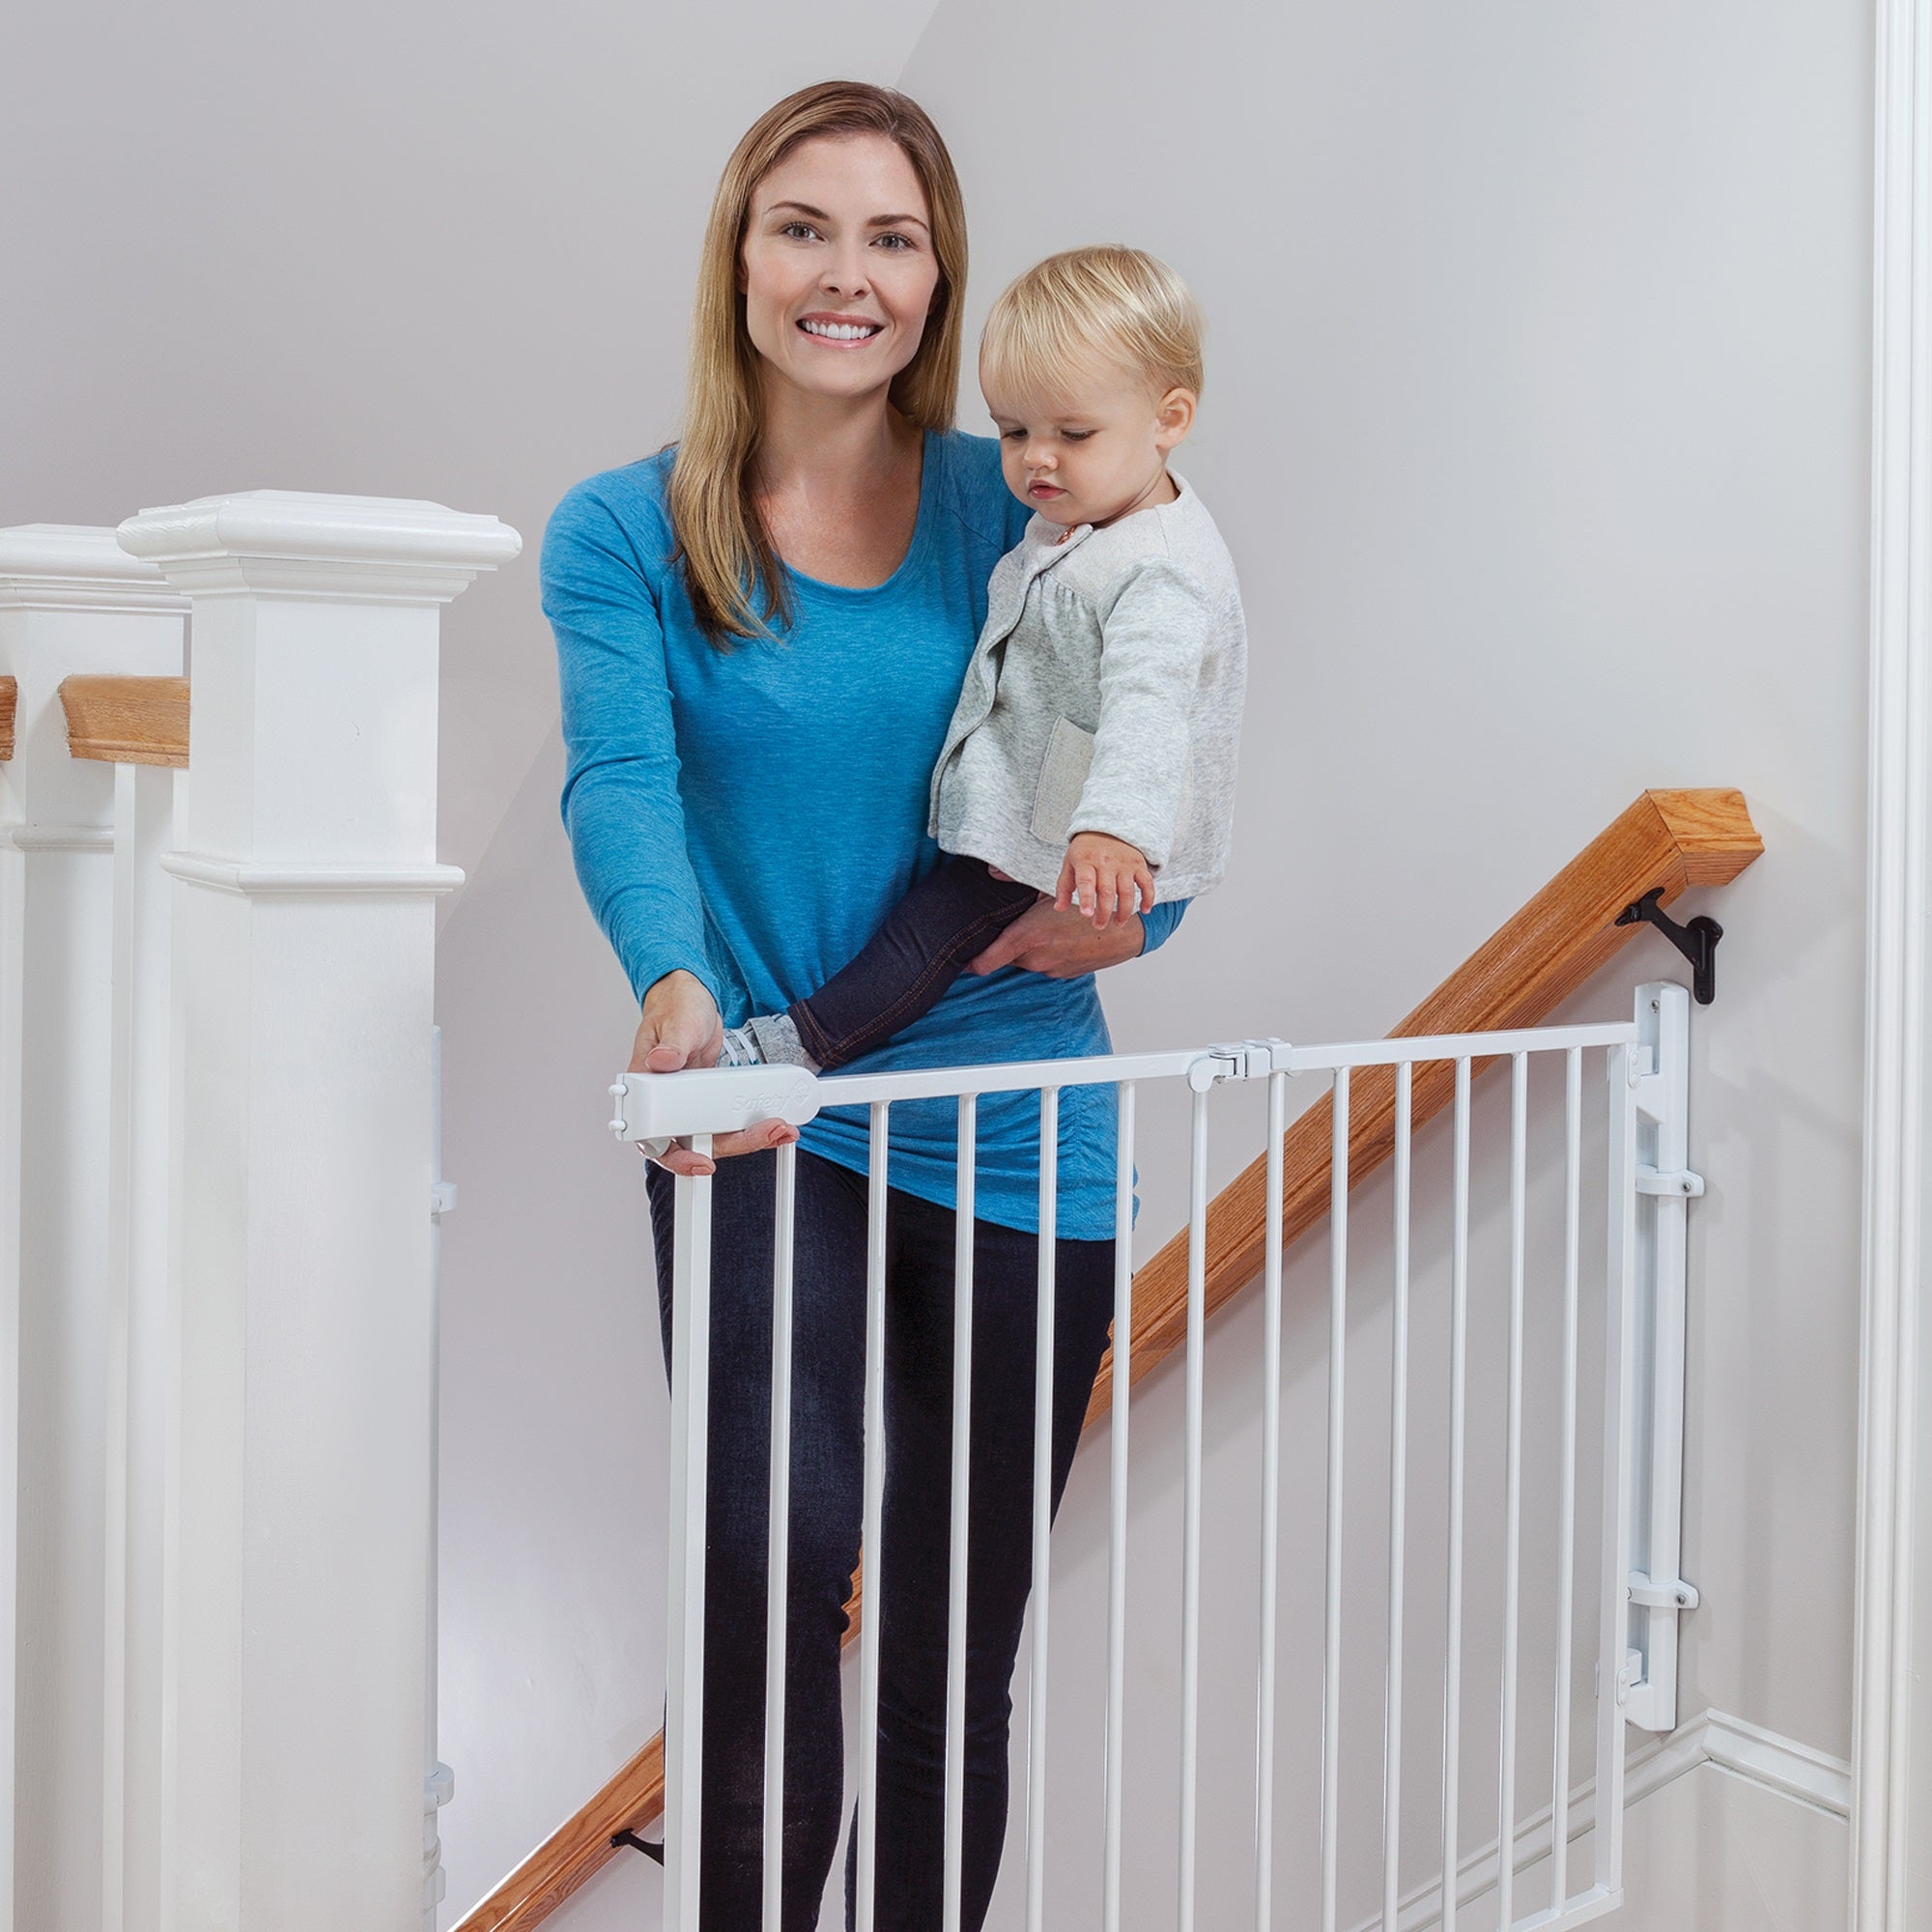 mom wearing blue shirt holding baby at top of stairs opening gate